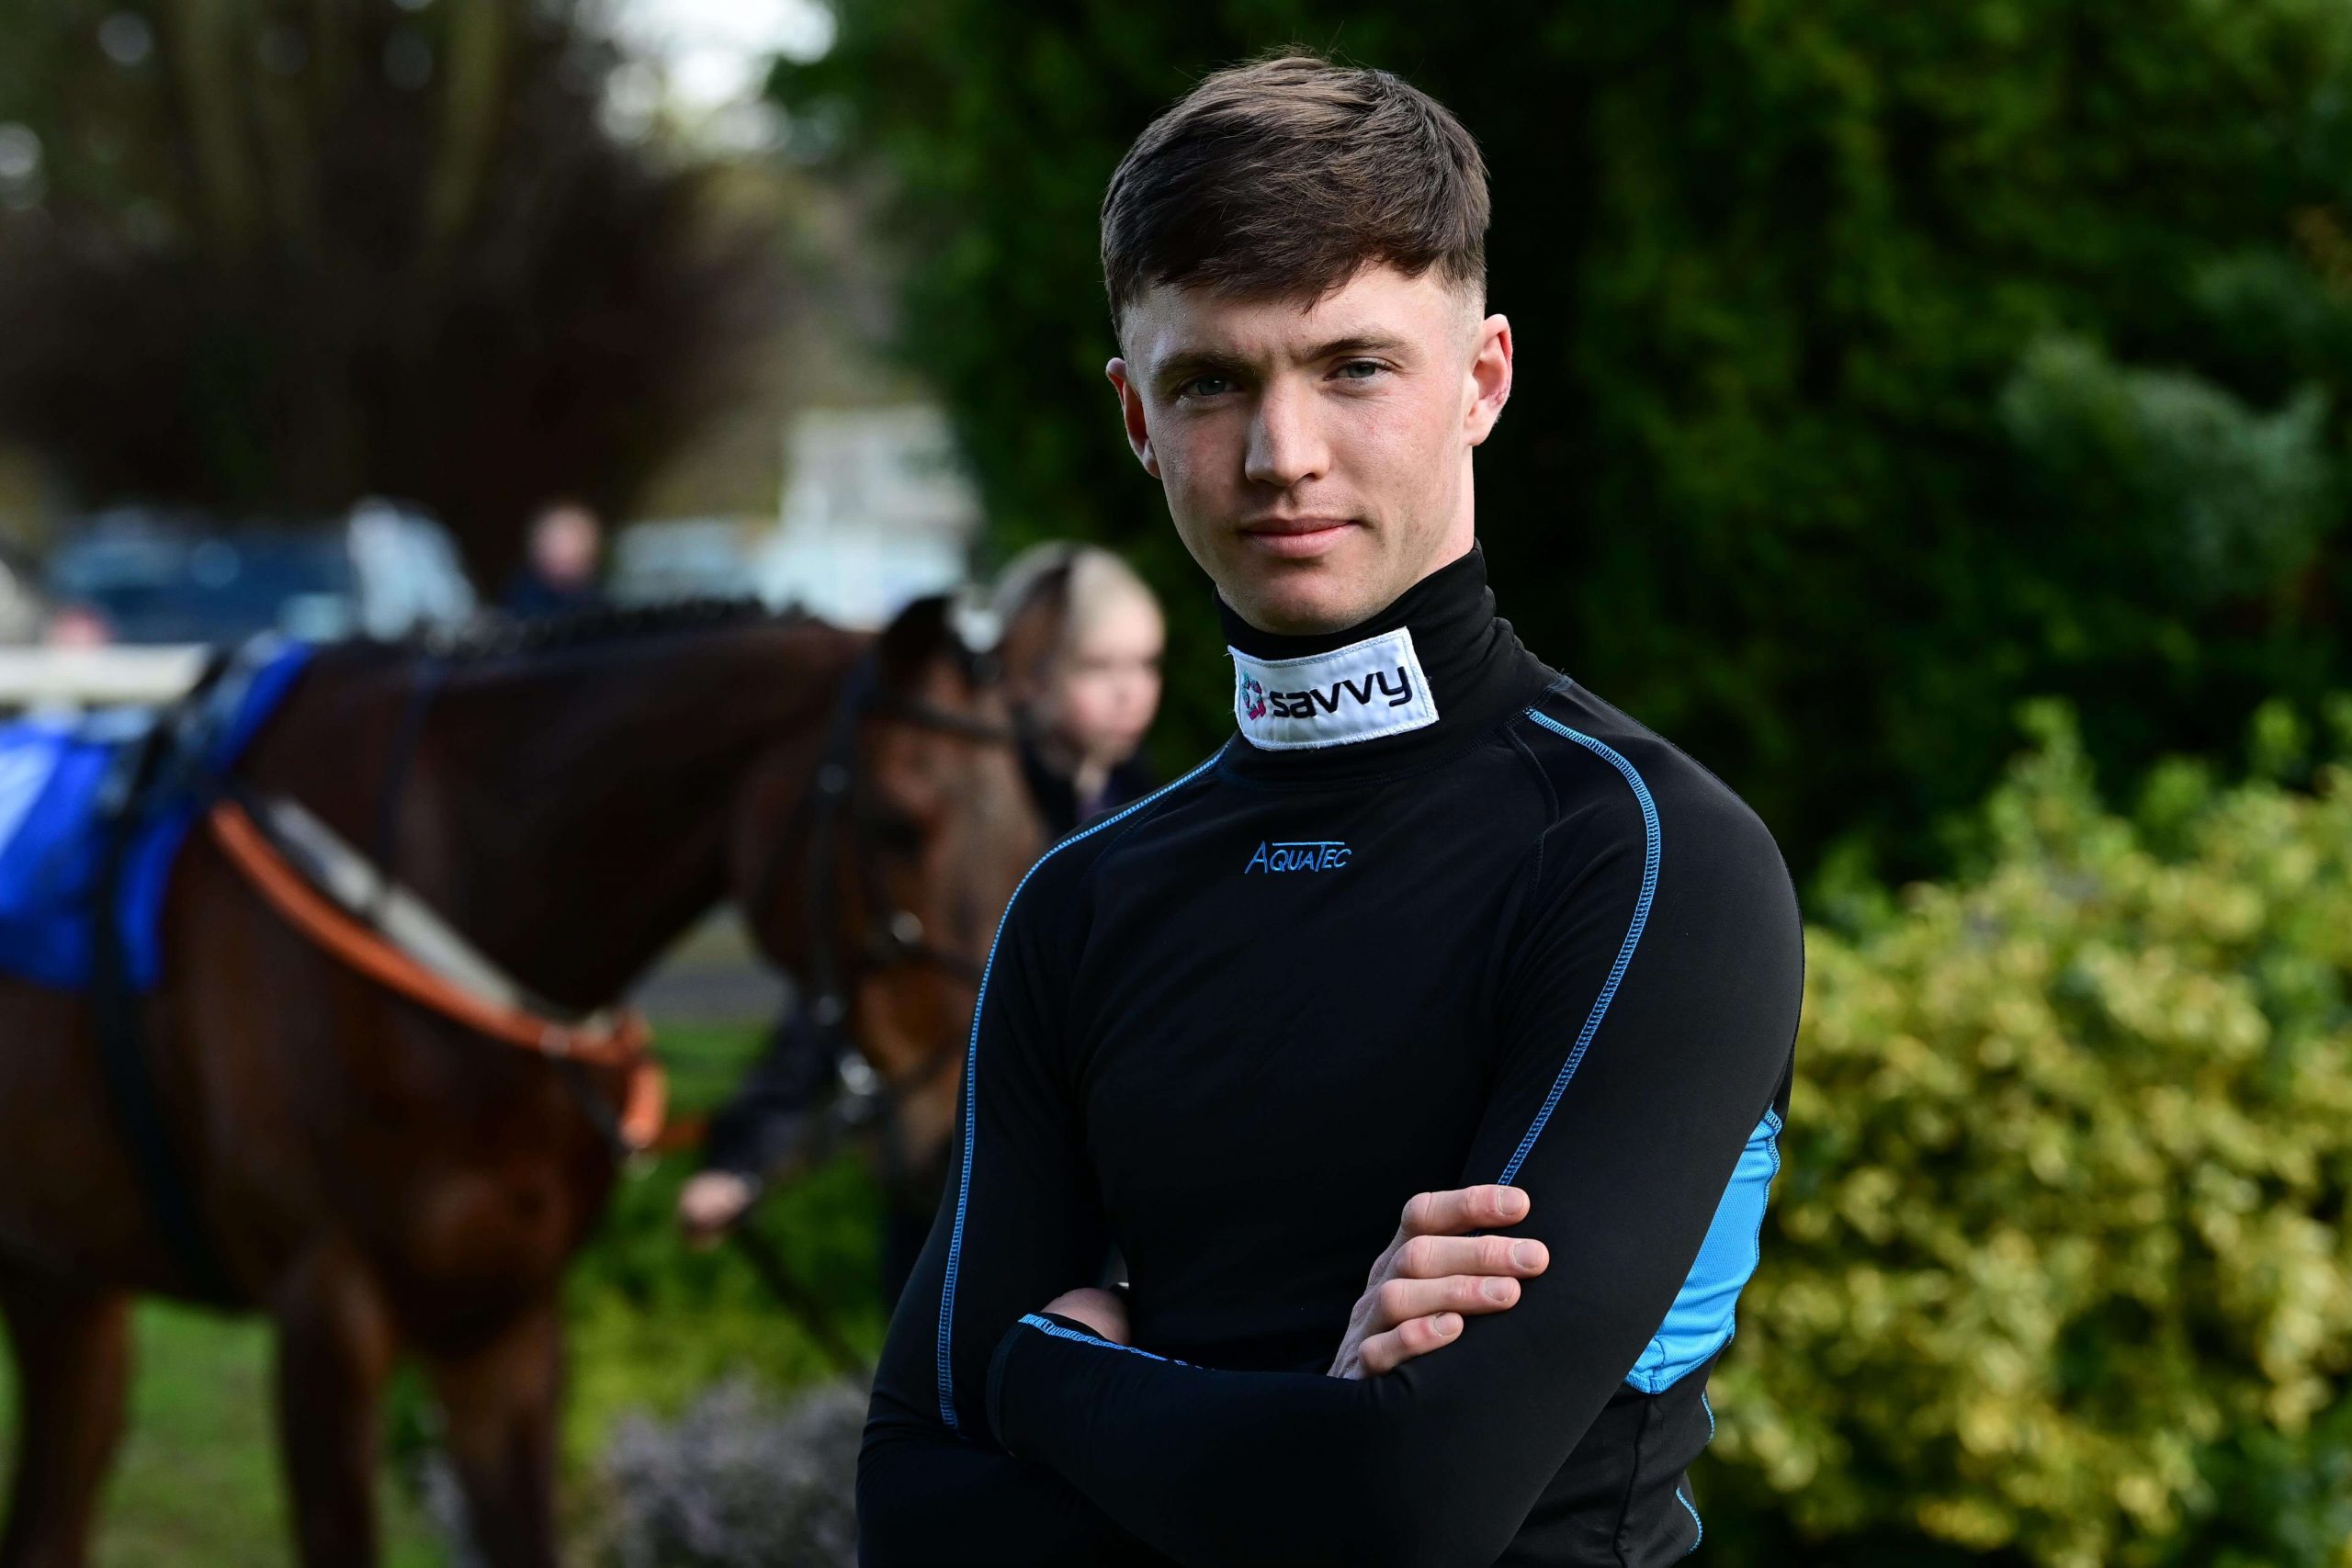 A professional photo of jockey Michael O'Sullivan with his horse in the background.